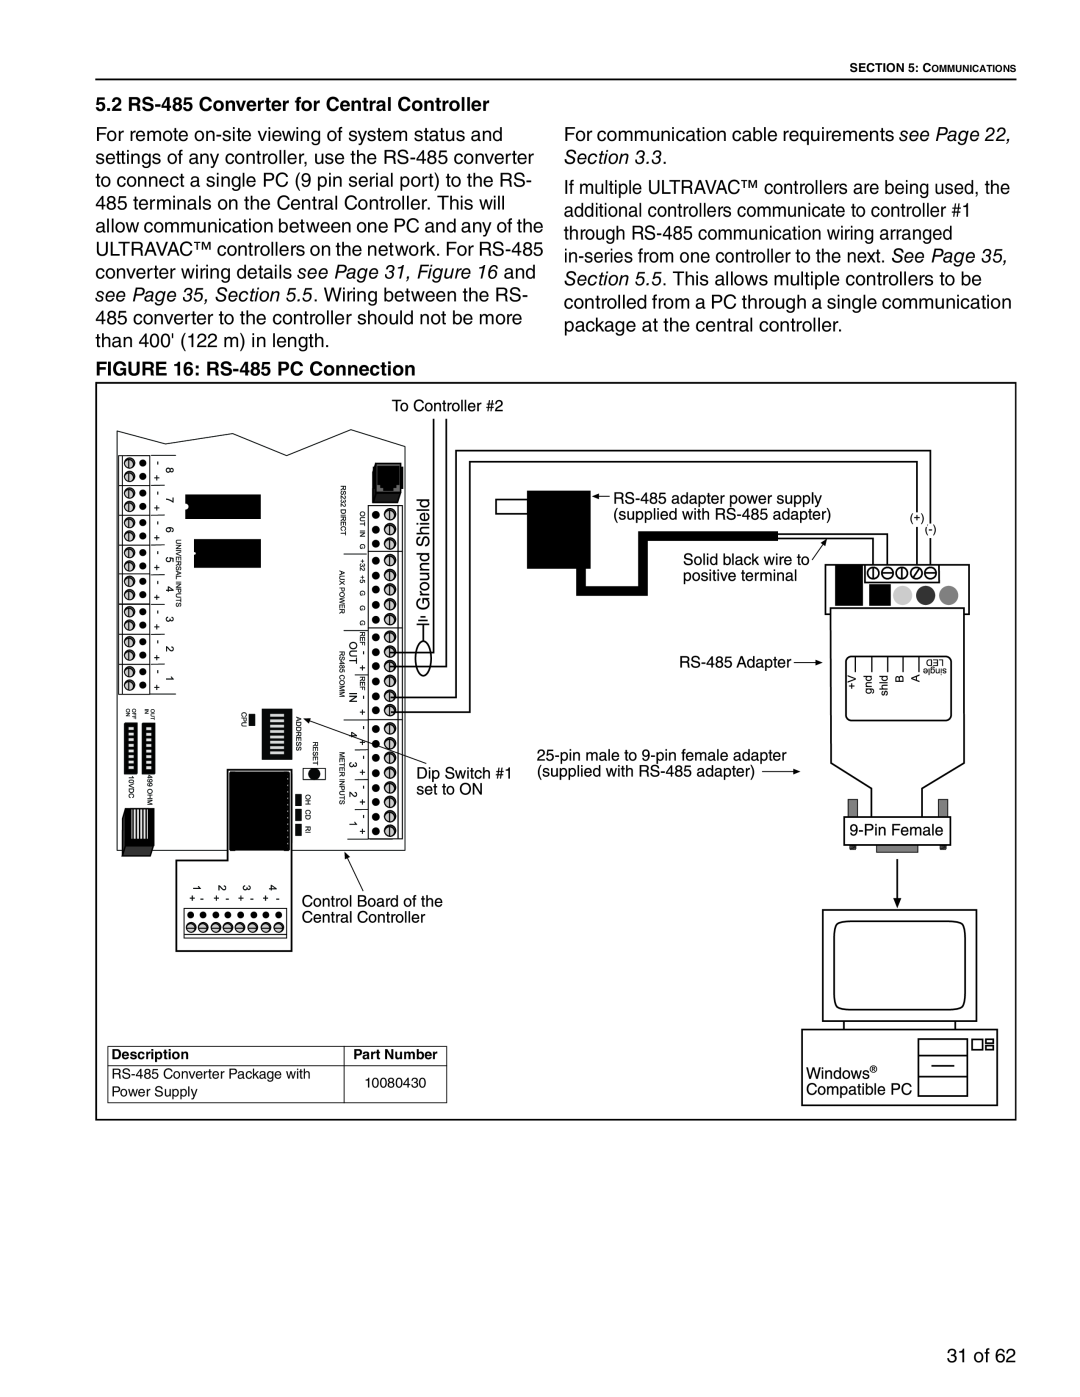 Roberts Gorden 10081601NA Rev H 12/11 service manual 5.2 RS-485Converter for Central Controller, RS-485PC Connection 